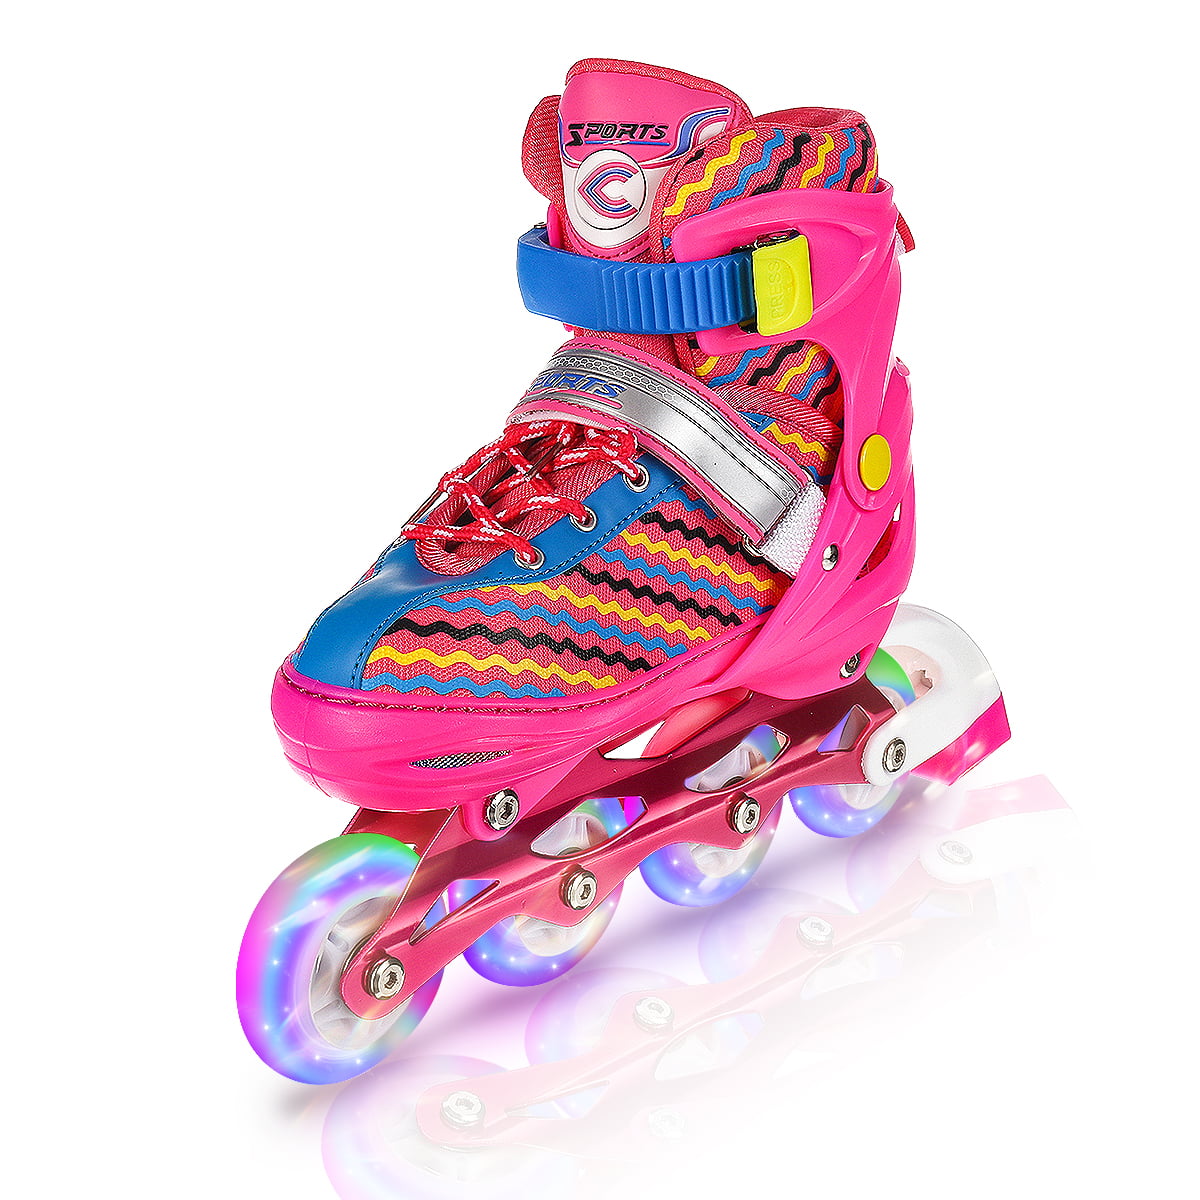 Details about   Inline Skates with Flashing Wheel Adjustable Roller Blades Kids Boys Girls Gifts 